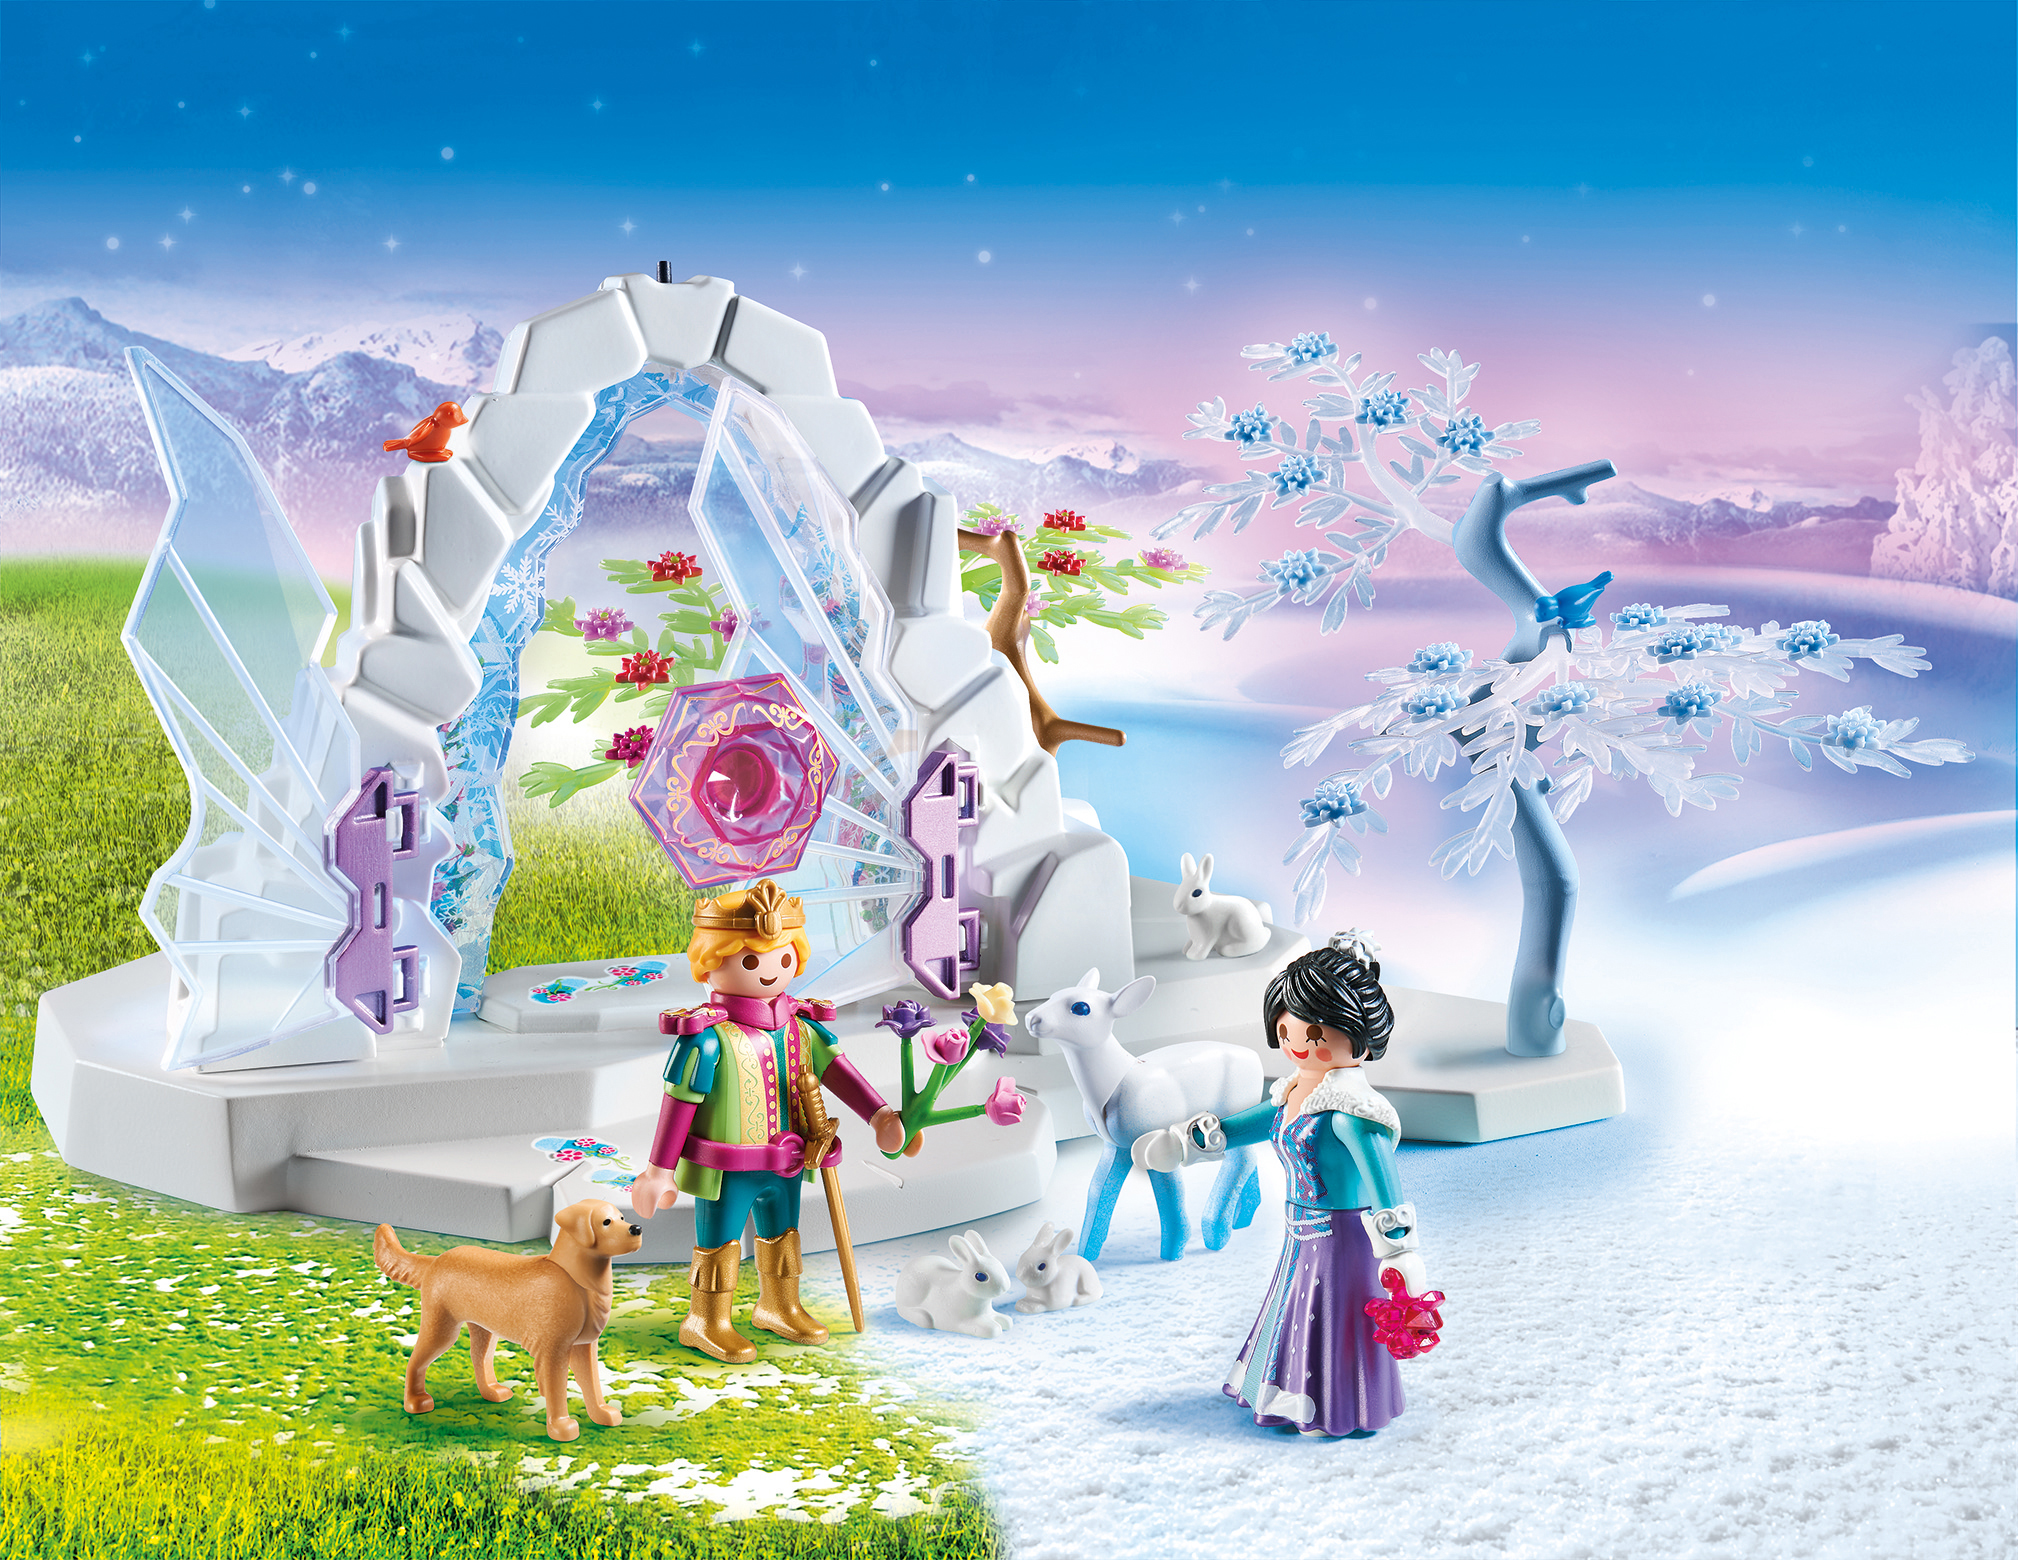 PLAYMOBIL Crystal Gate to the Winter World Doll Playset - image 3 of 6